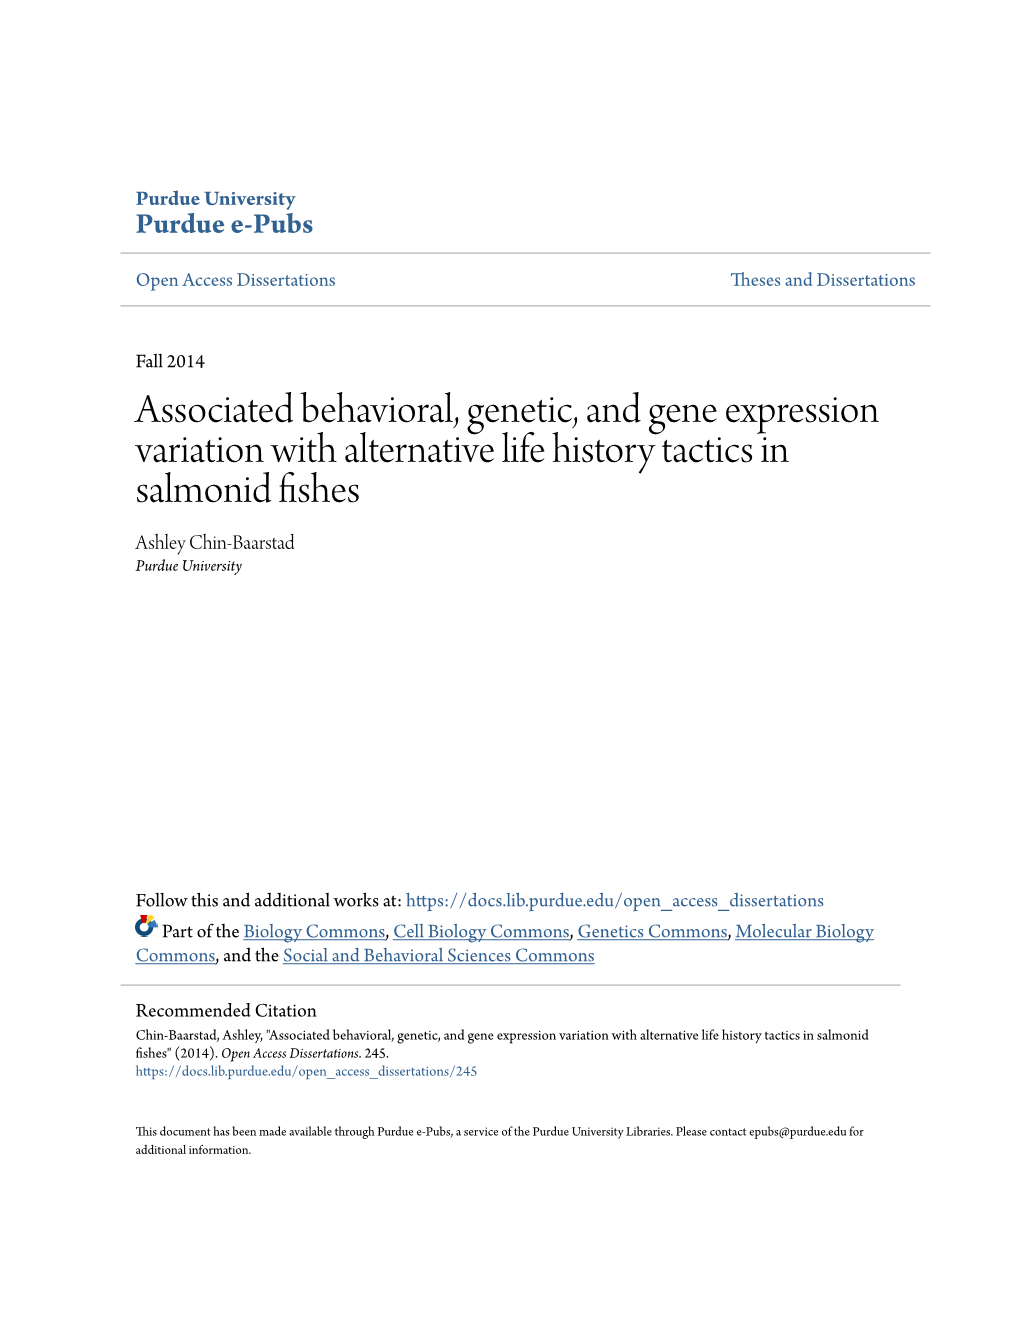 Associated Behavioral, Genetic, and Gene Expression Variation with Alternative Life History Tactics in Salmonid Fishes Ashley Chin-Baarstad Purdue University